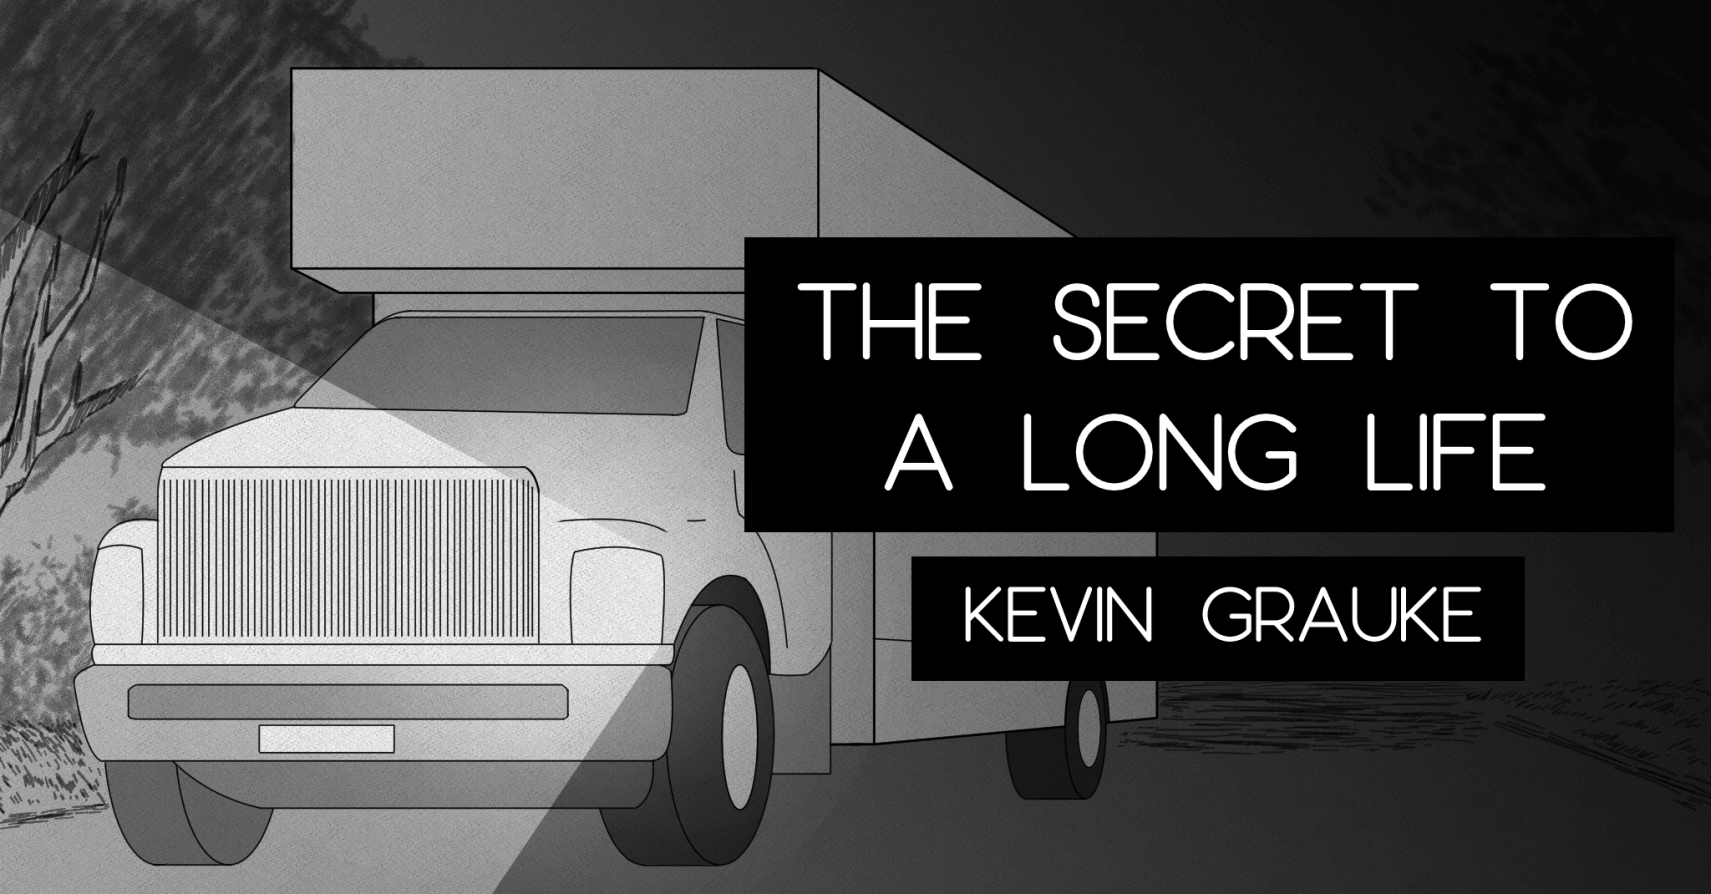 THE SECRET TO A LONG LIFE by Kevin Grauke